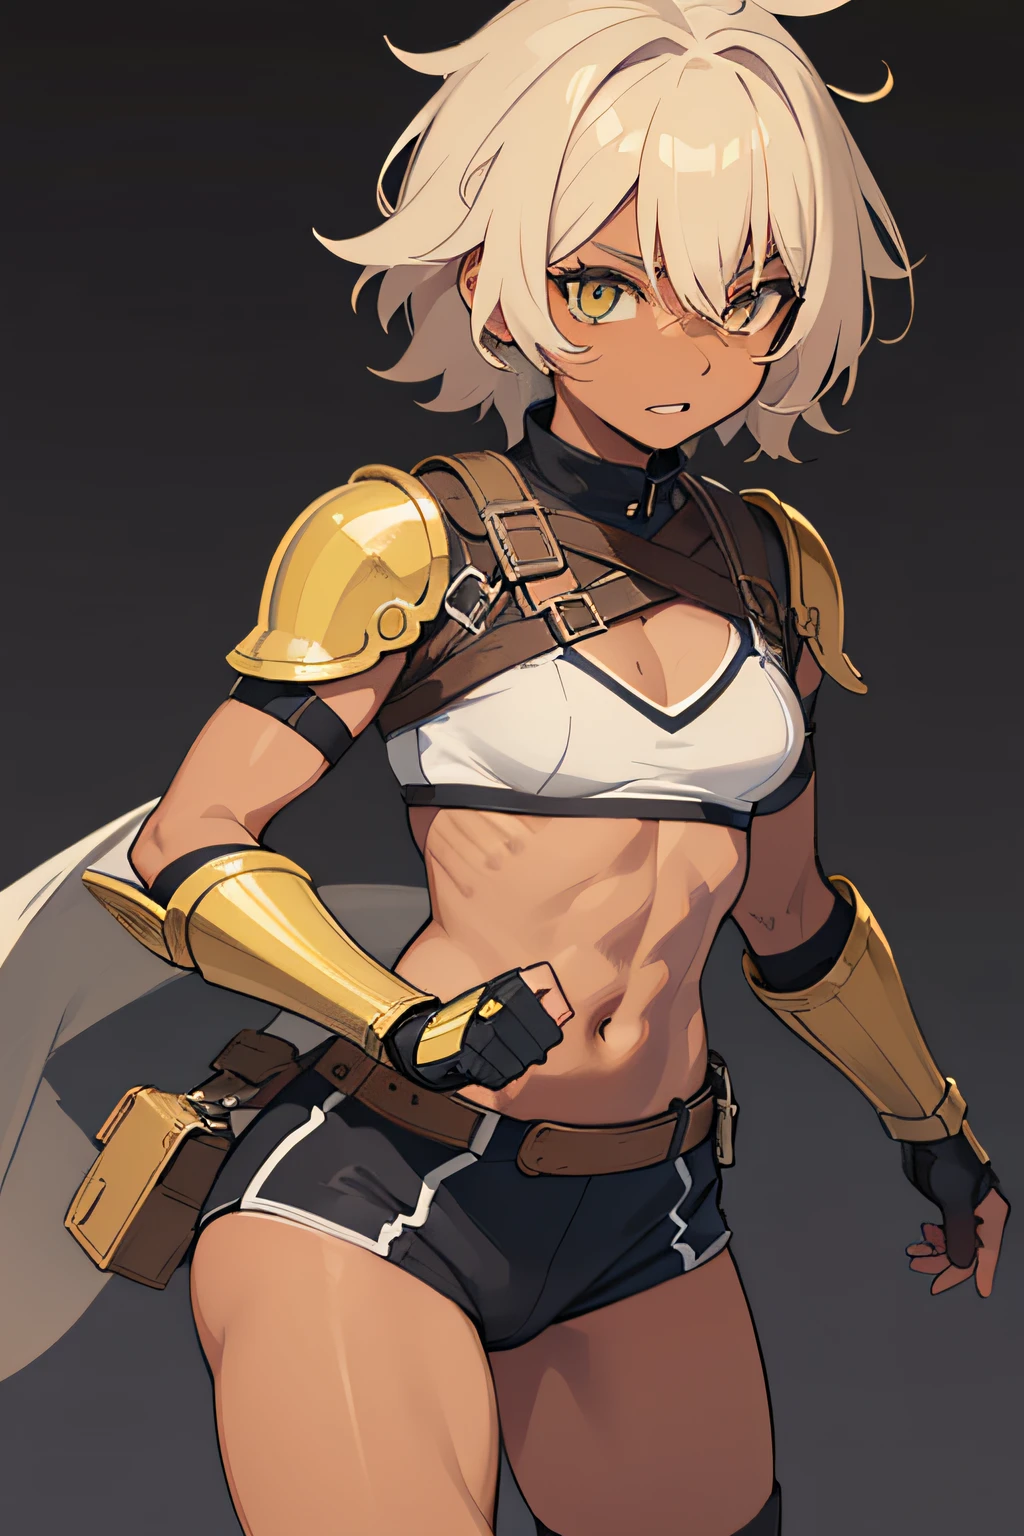 female, 1 young, body with muscles, style: Tomboy, small breasts, short stature, (Eye color: hazel), (skin color: dark tan), Hair color: dirty blonde, Hair style: Short wavy hair kind of messy, base color: yellow. bra size from B71, Light armor, with gauntlets, Protection in specific areas,